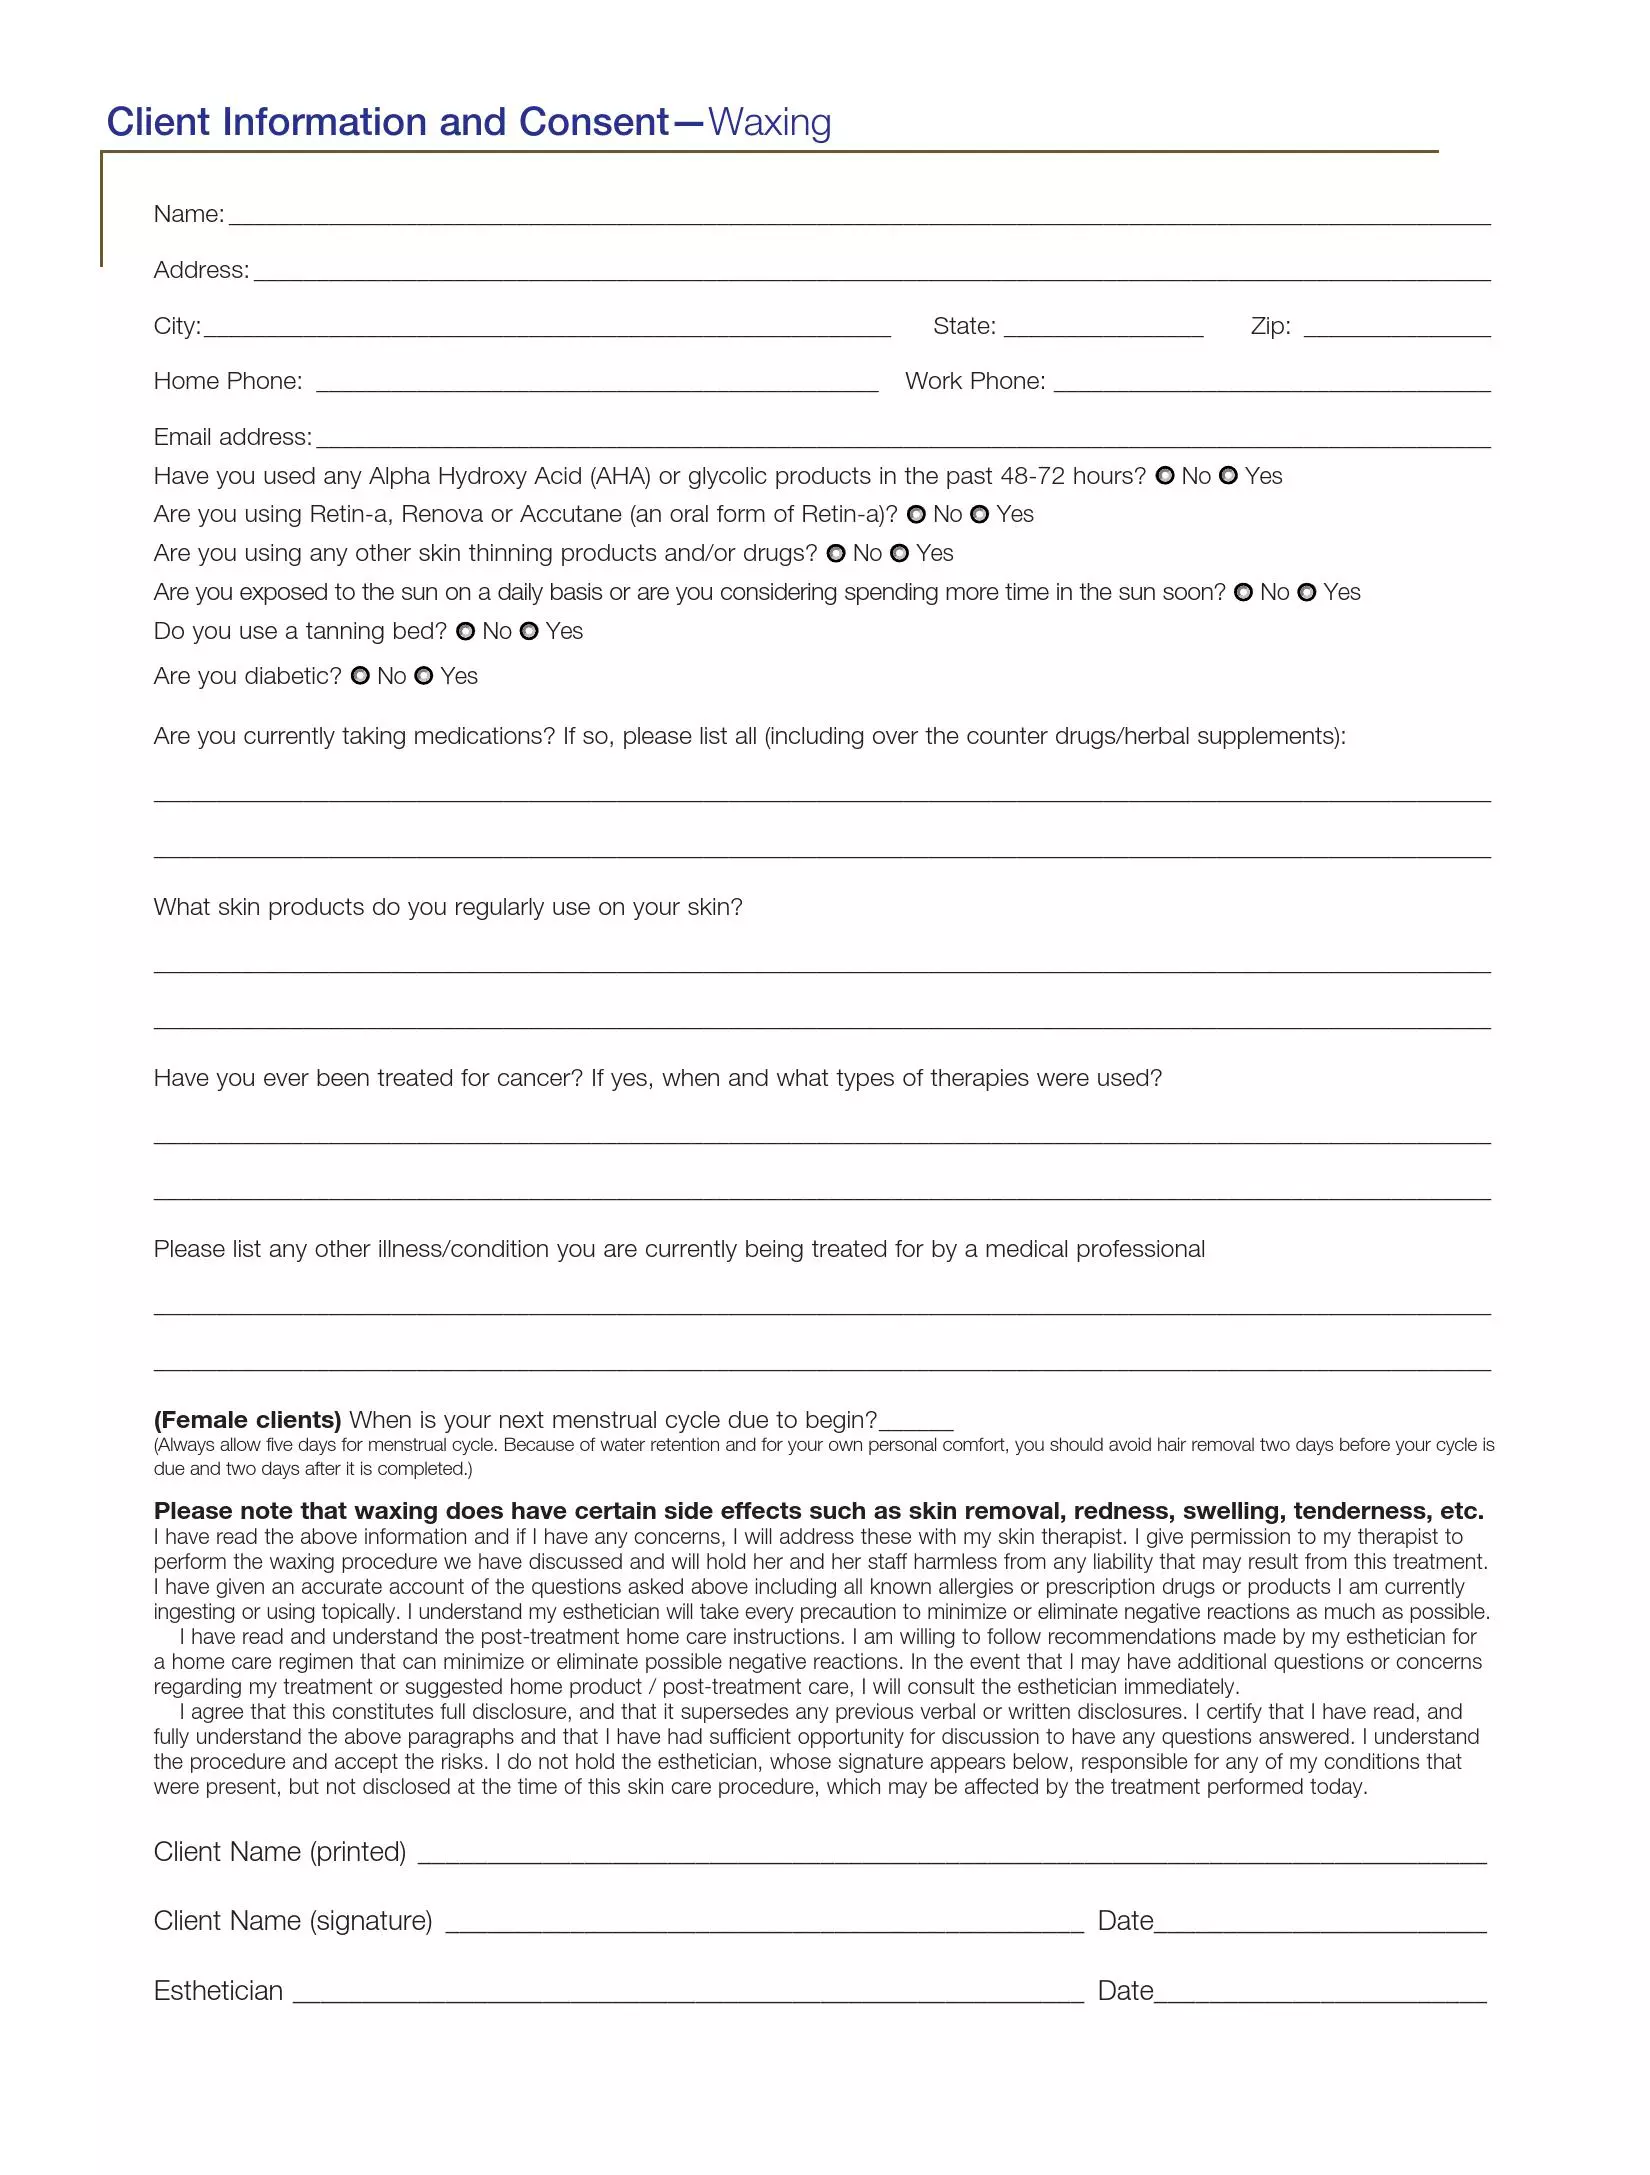 waxing consent form preview